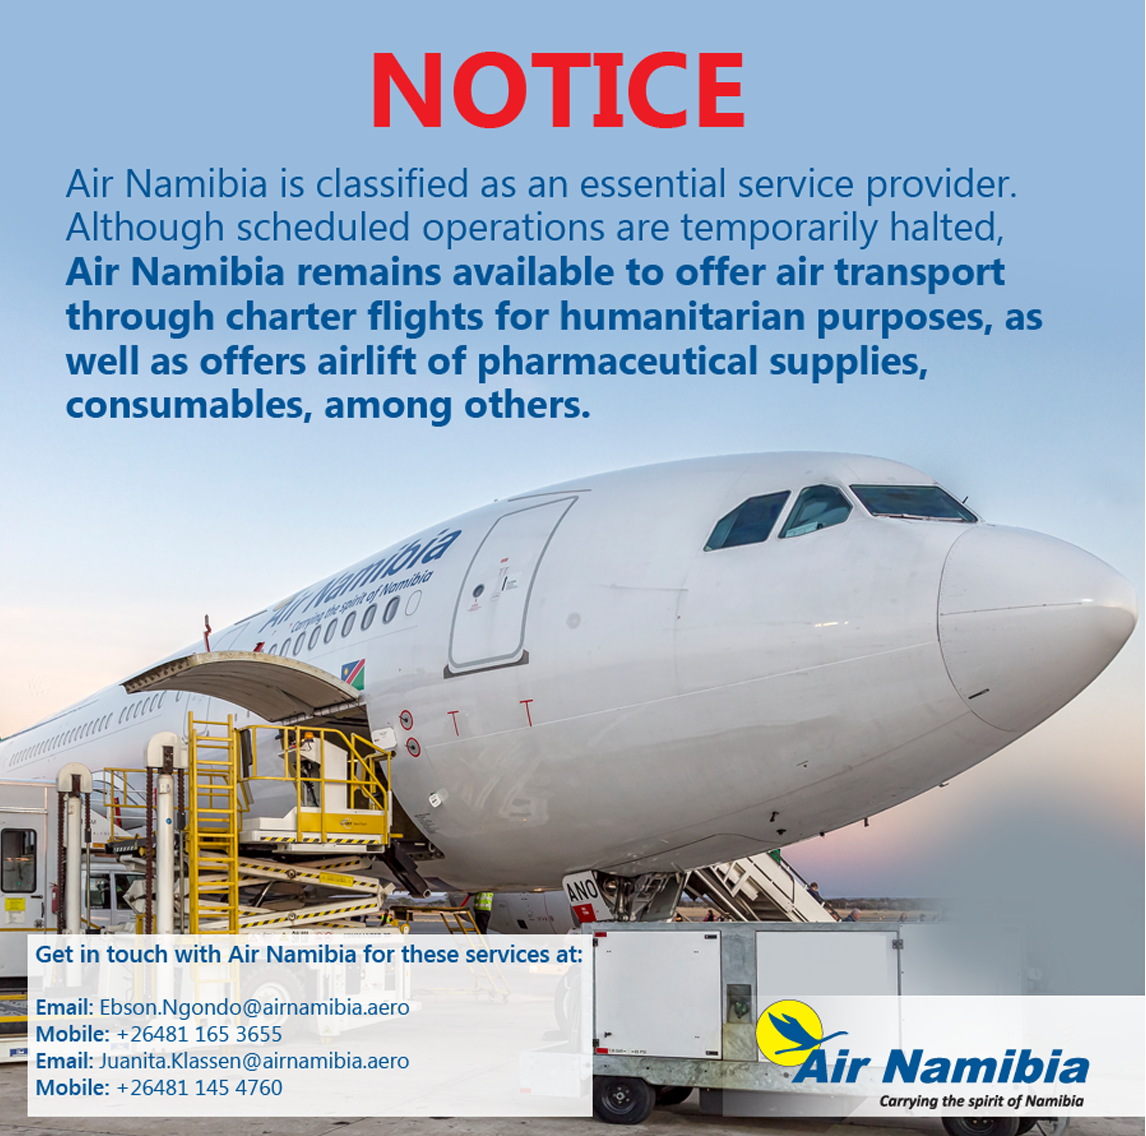 Air Namibia is classified as an essential service provider.